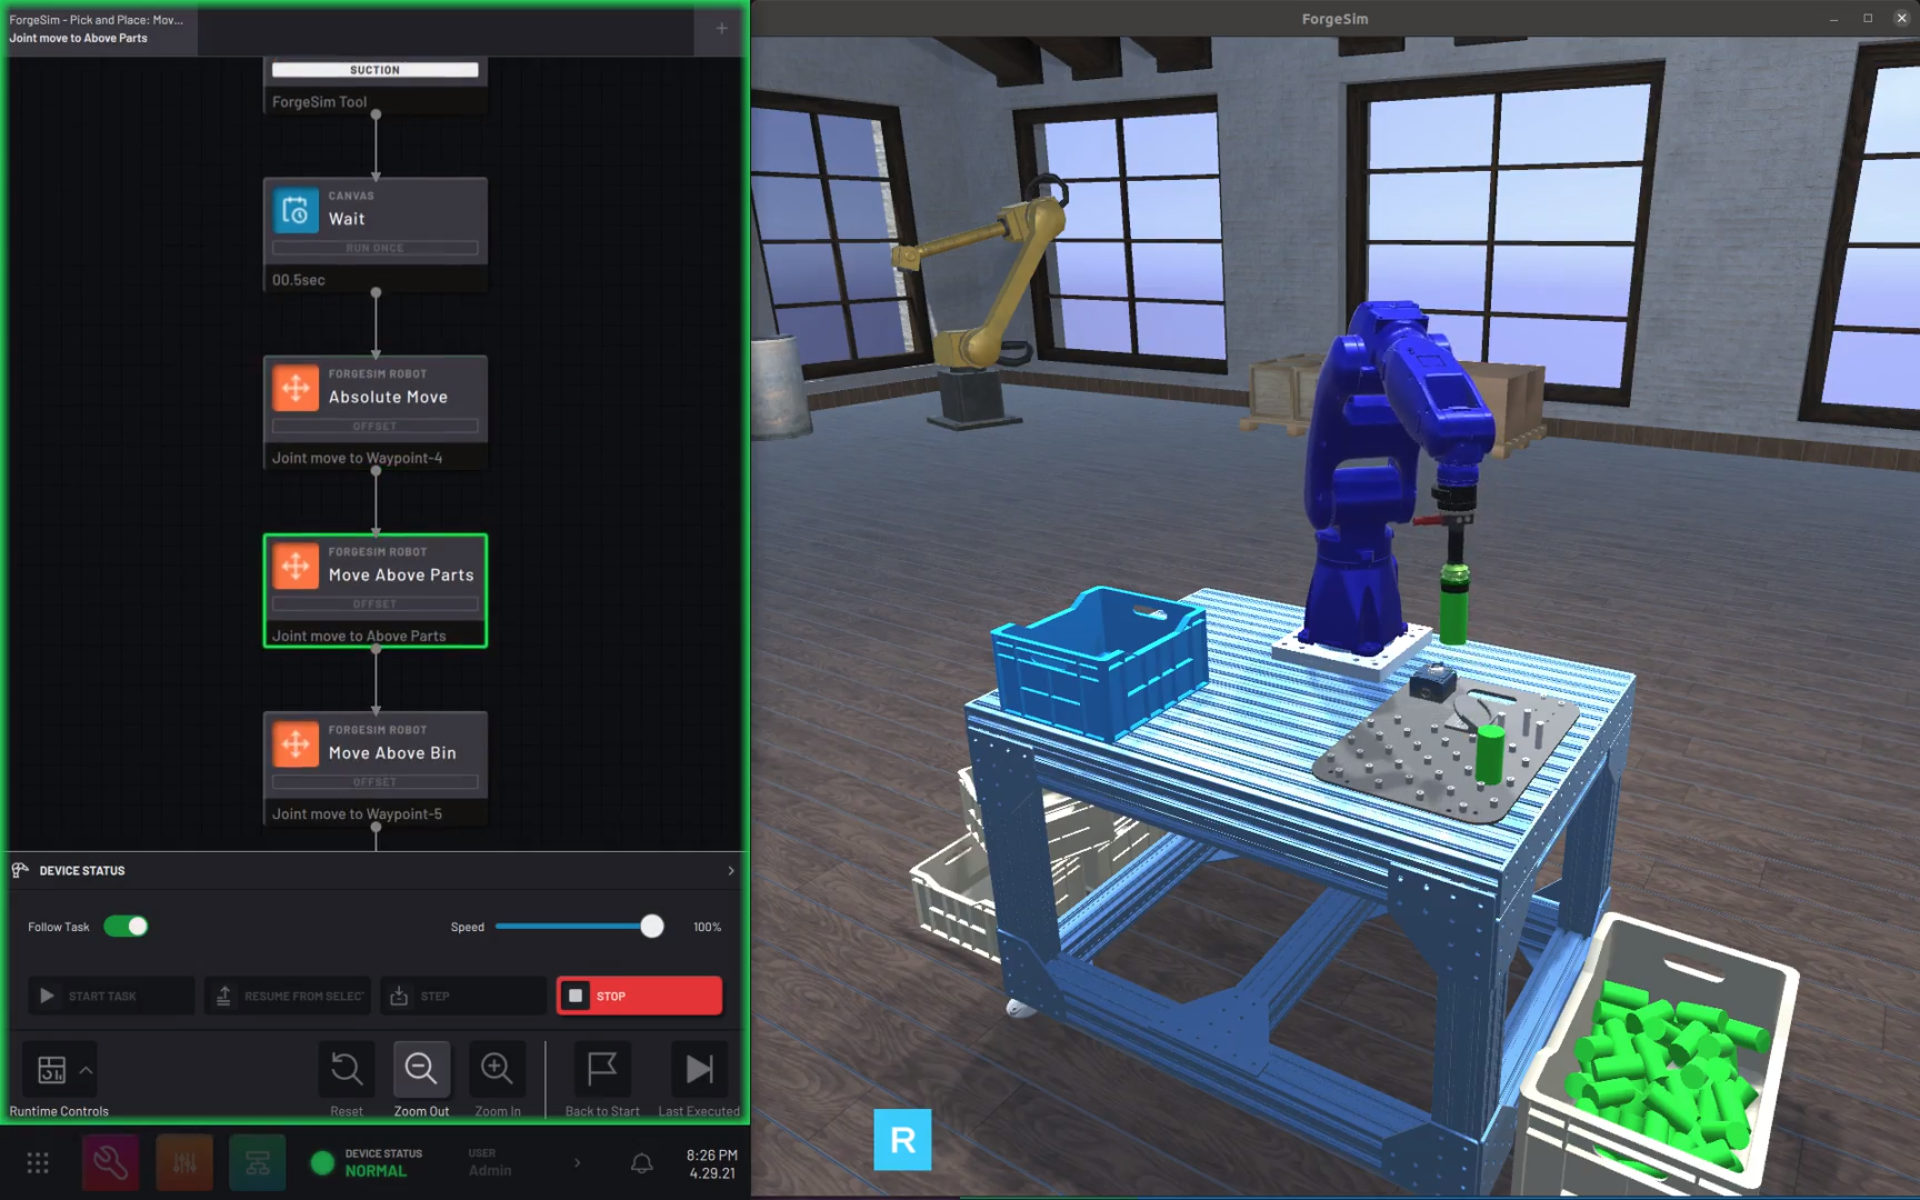 READY’s Unity simulator presents a wide range of robot environments for learning different activities